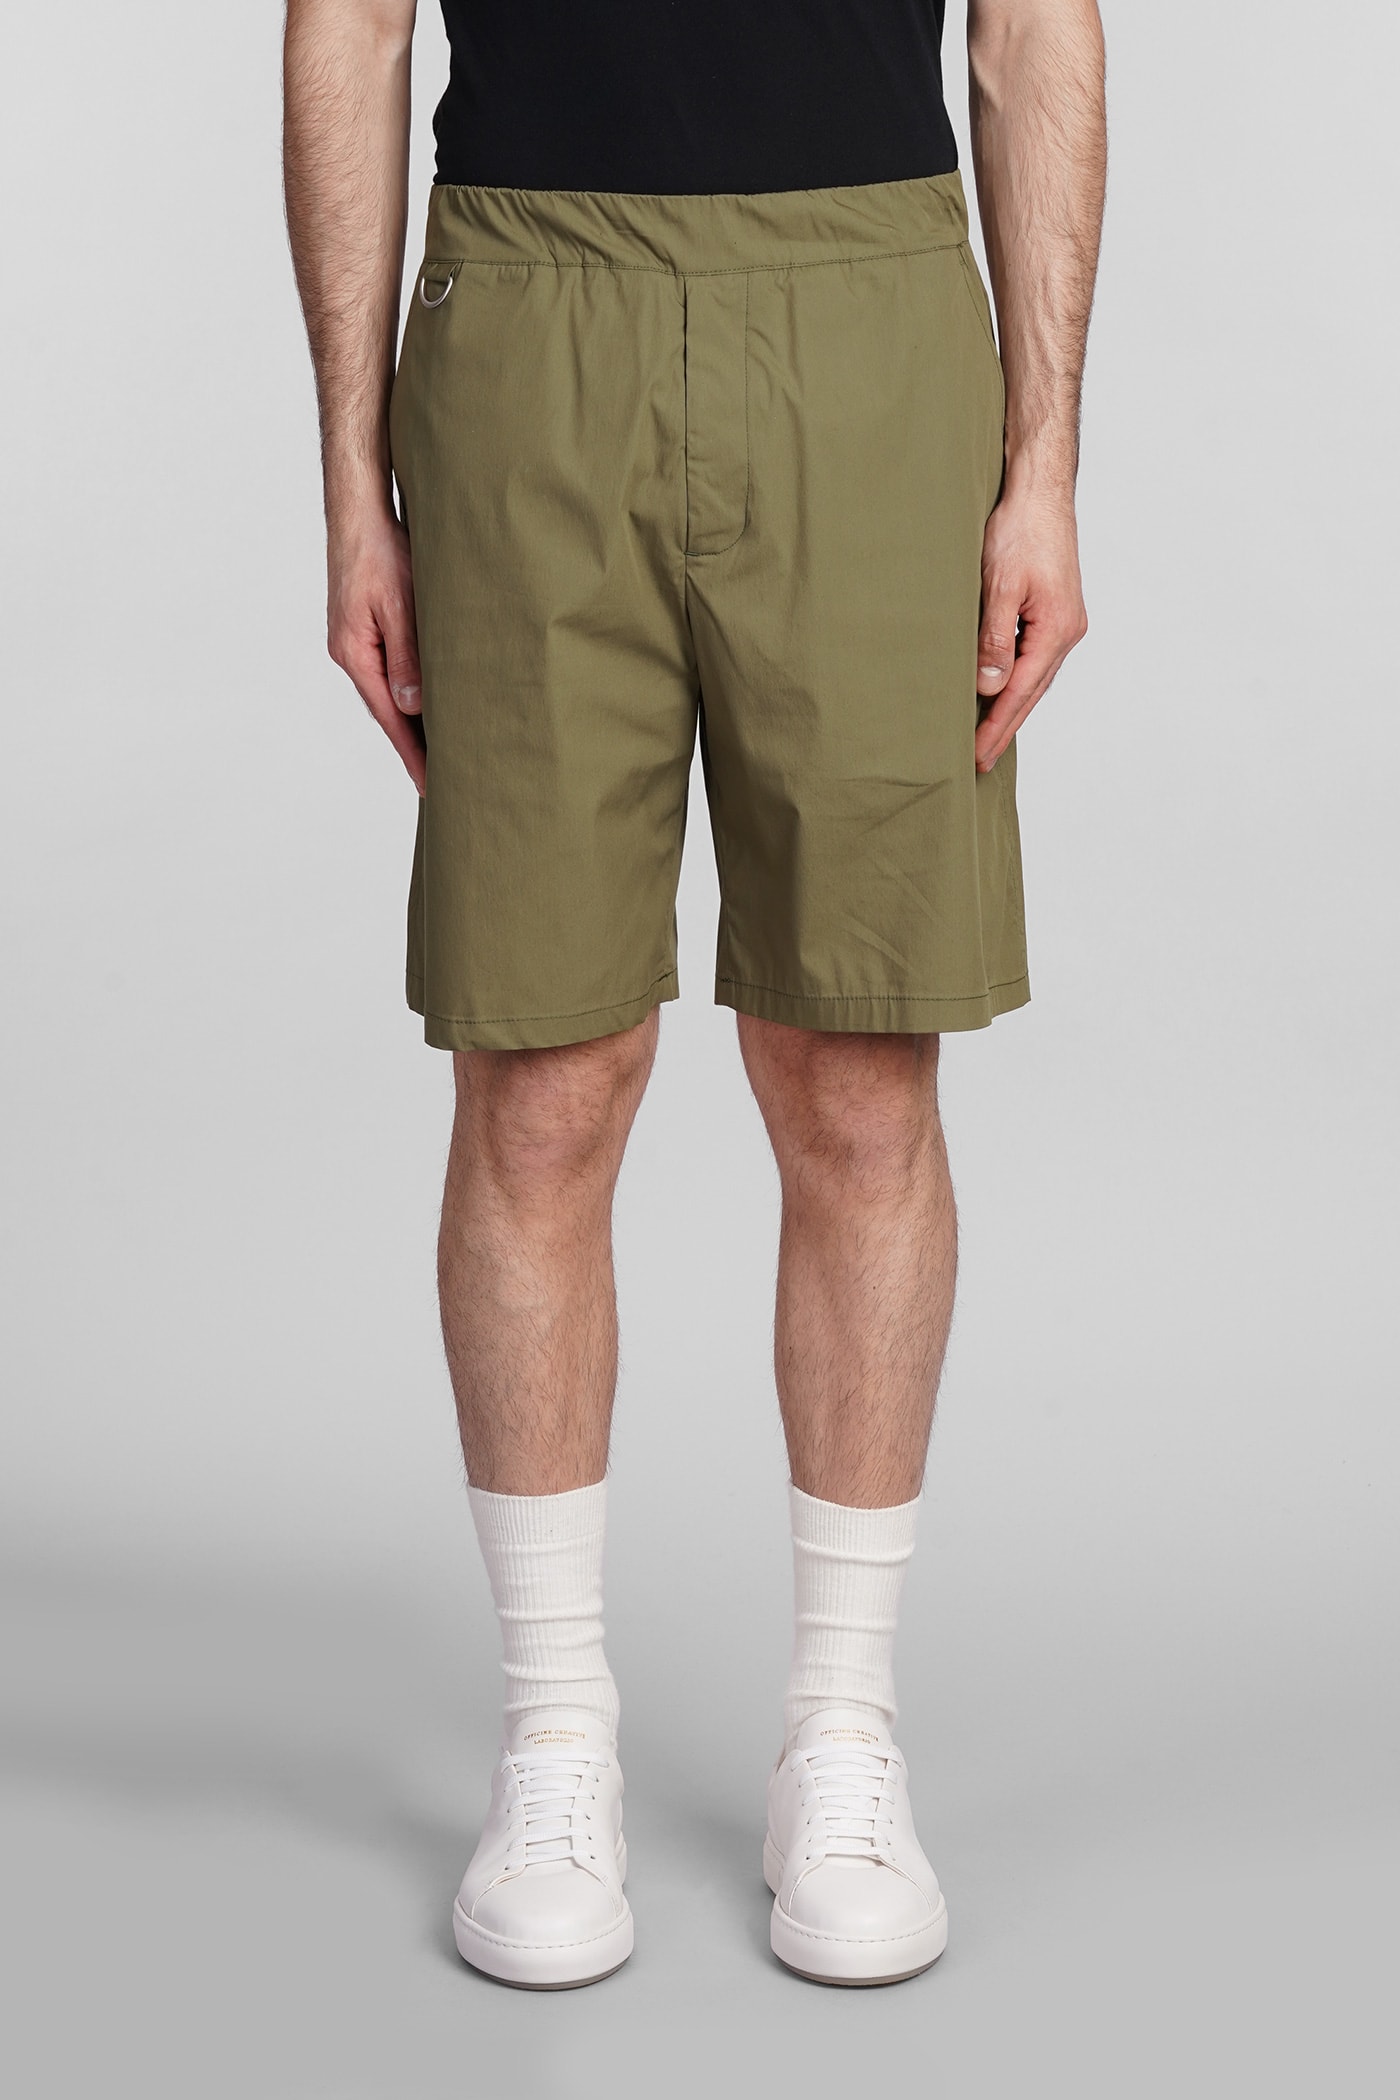 Combo Shorts In Green Cotton